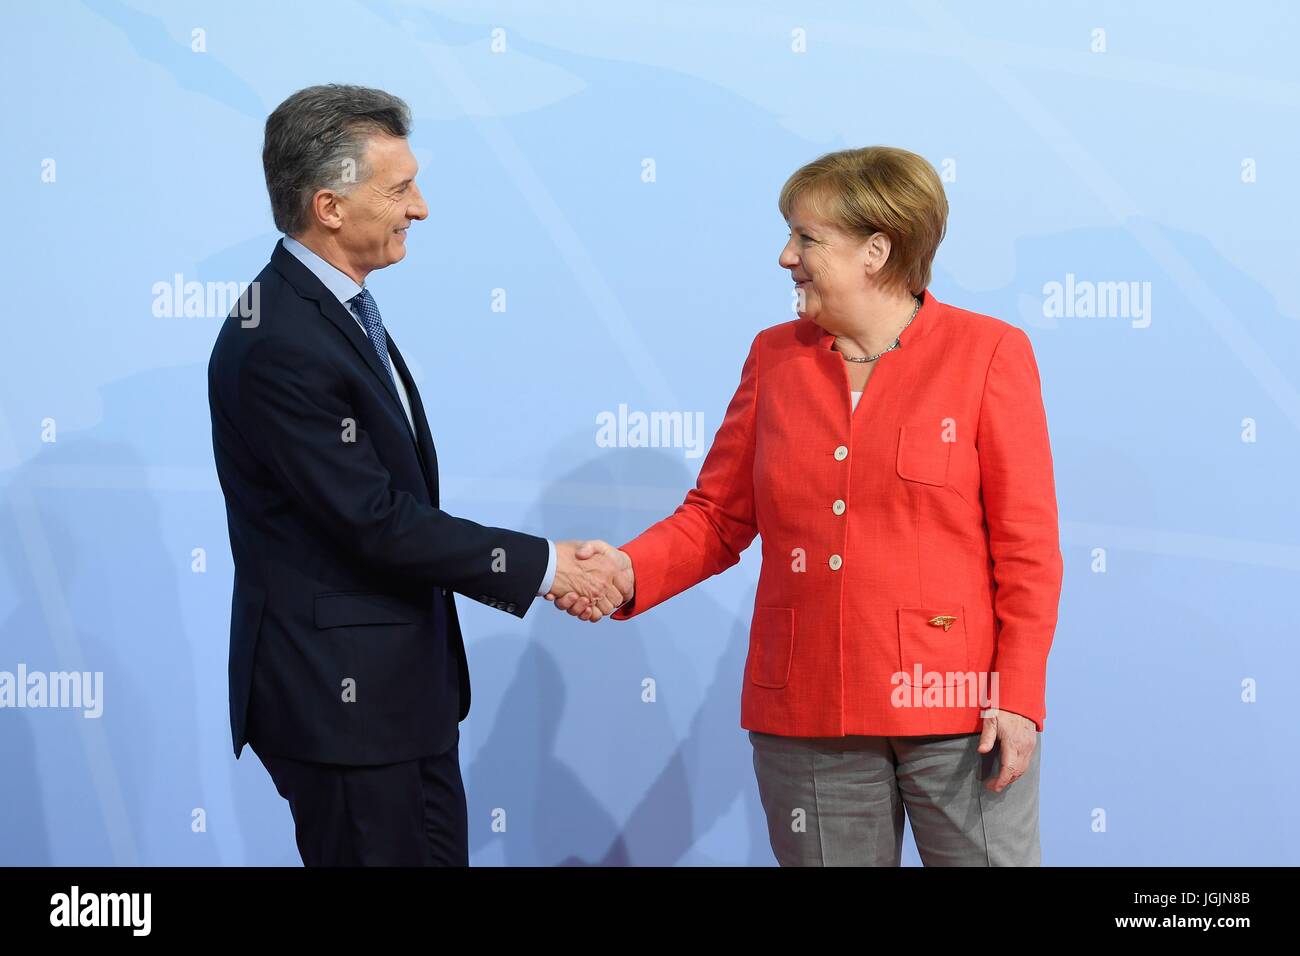 Hamburg, Germany. 07th July, 2017. German Chancellor Angela Merkel welcomes Argentine President Mauricio Macri at the start of the first day of the G20 Summit meeting July 7, 2017 in Hamburg, Germany. Credit: Planetpix/Alamy Live News Stock Photo